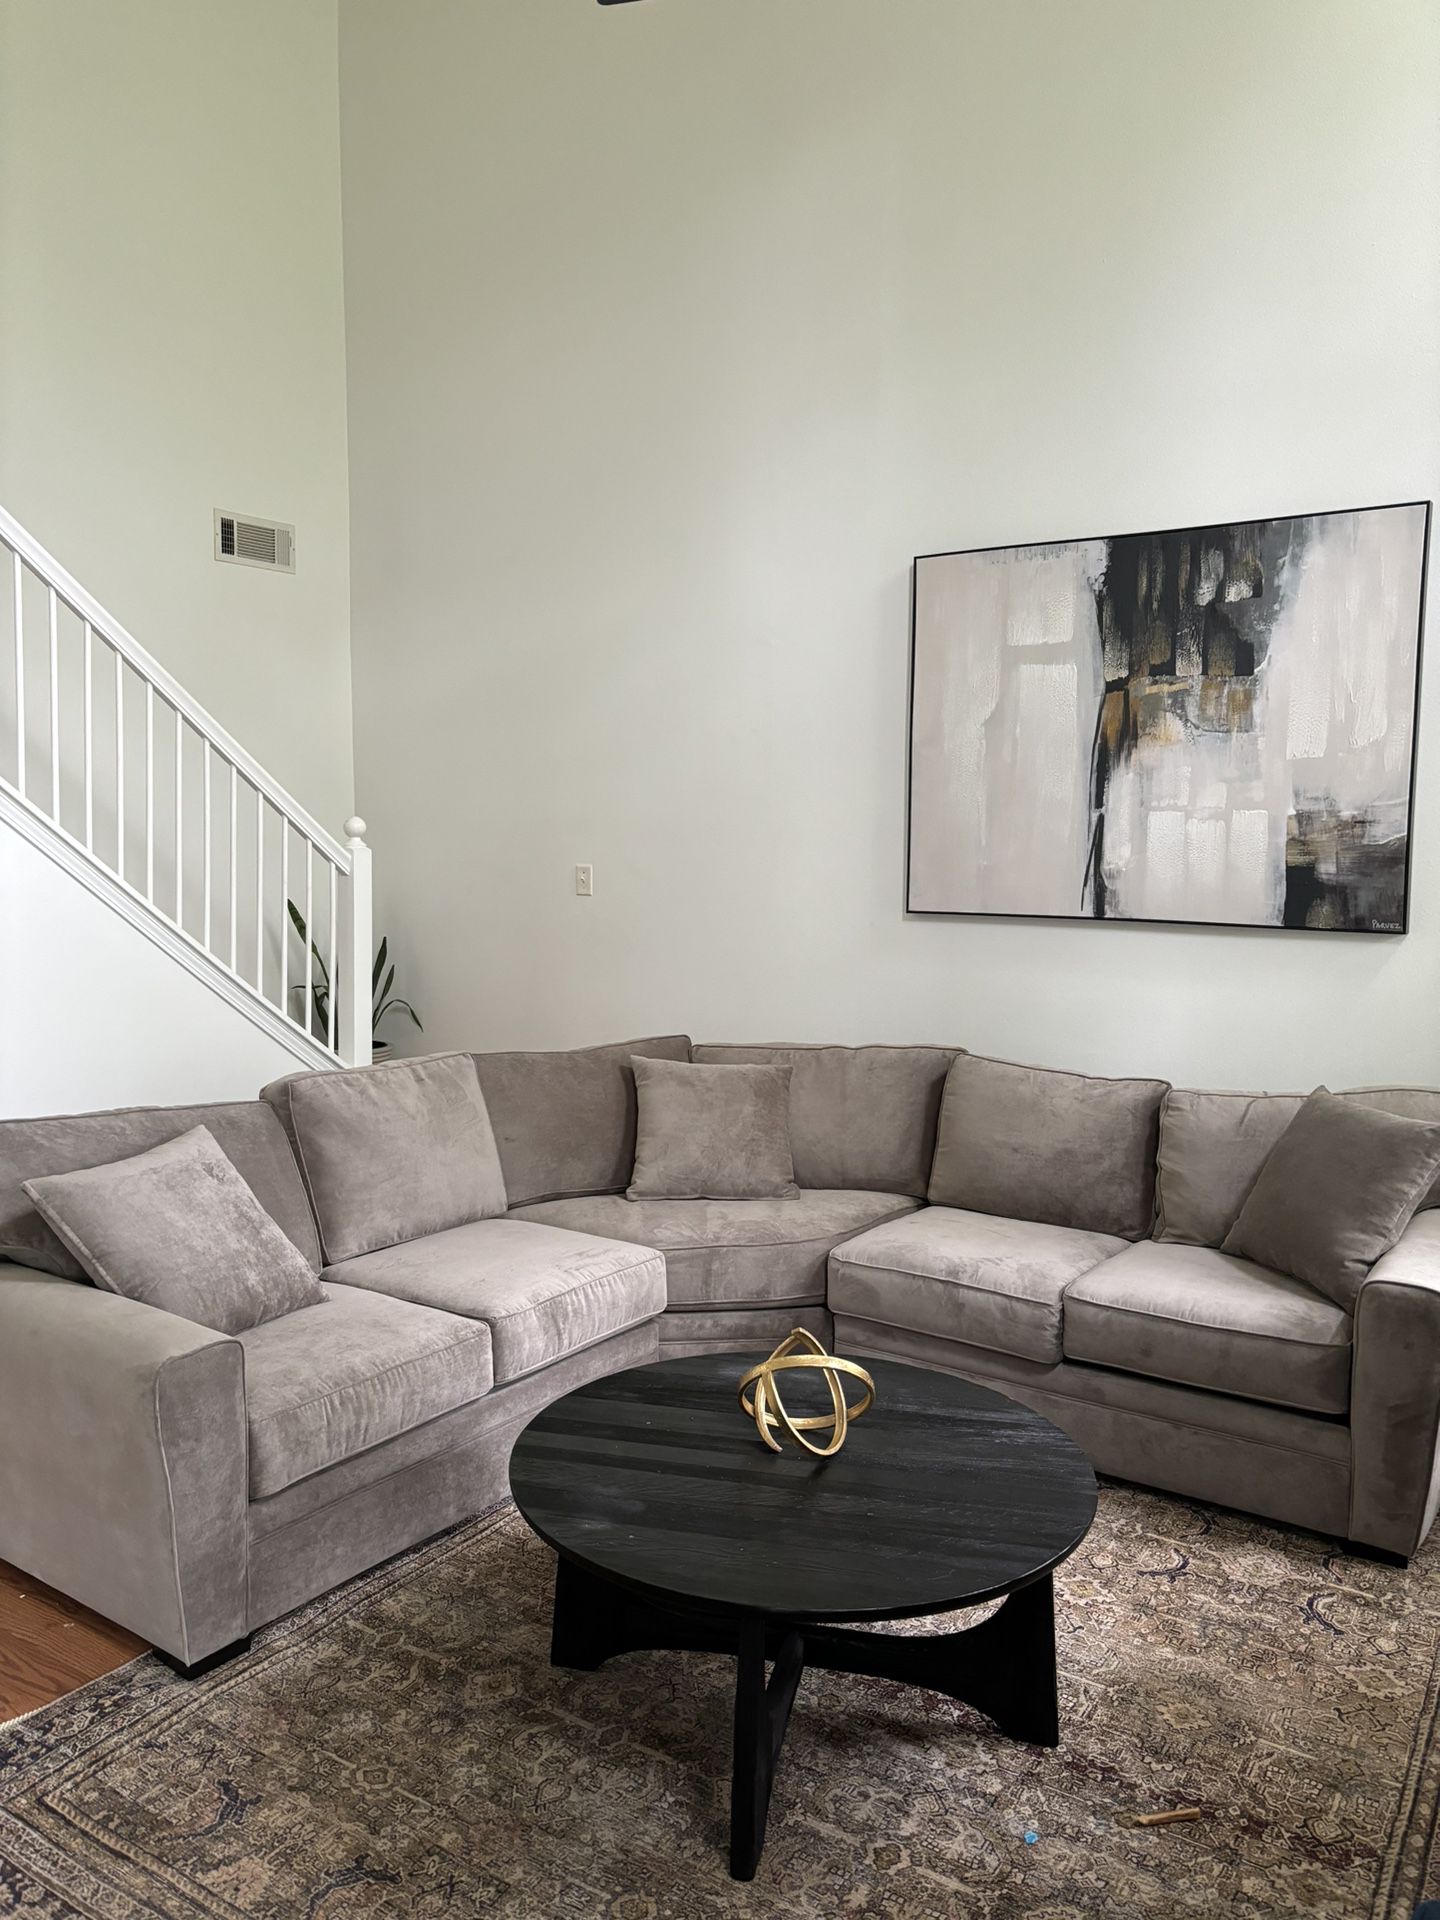 Brand new Gray Sectional Couch! 